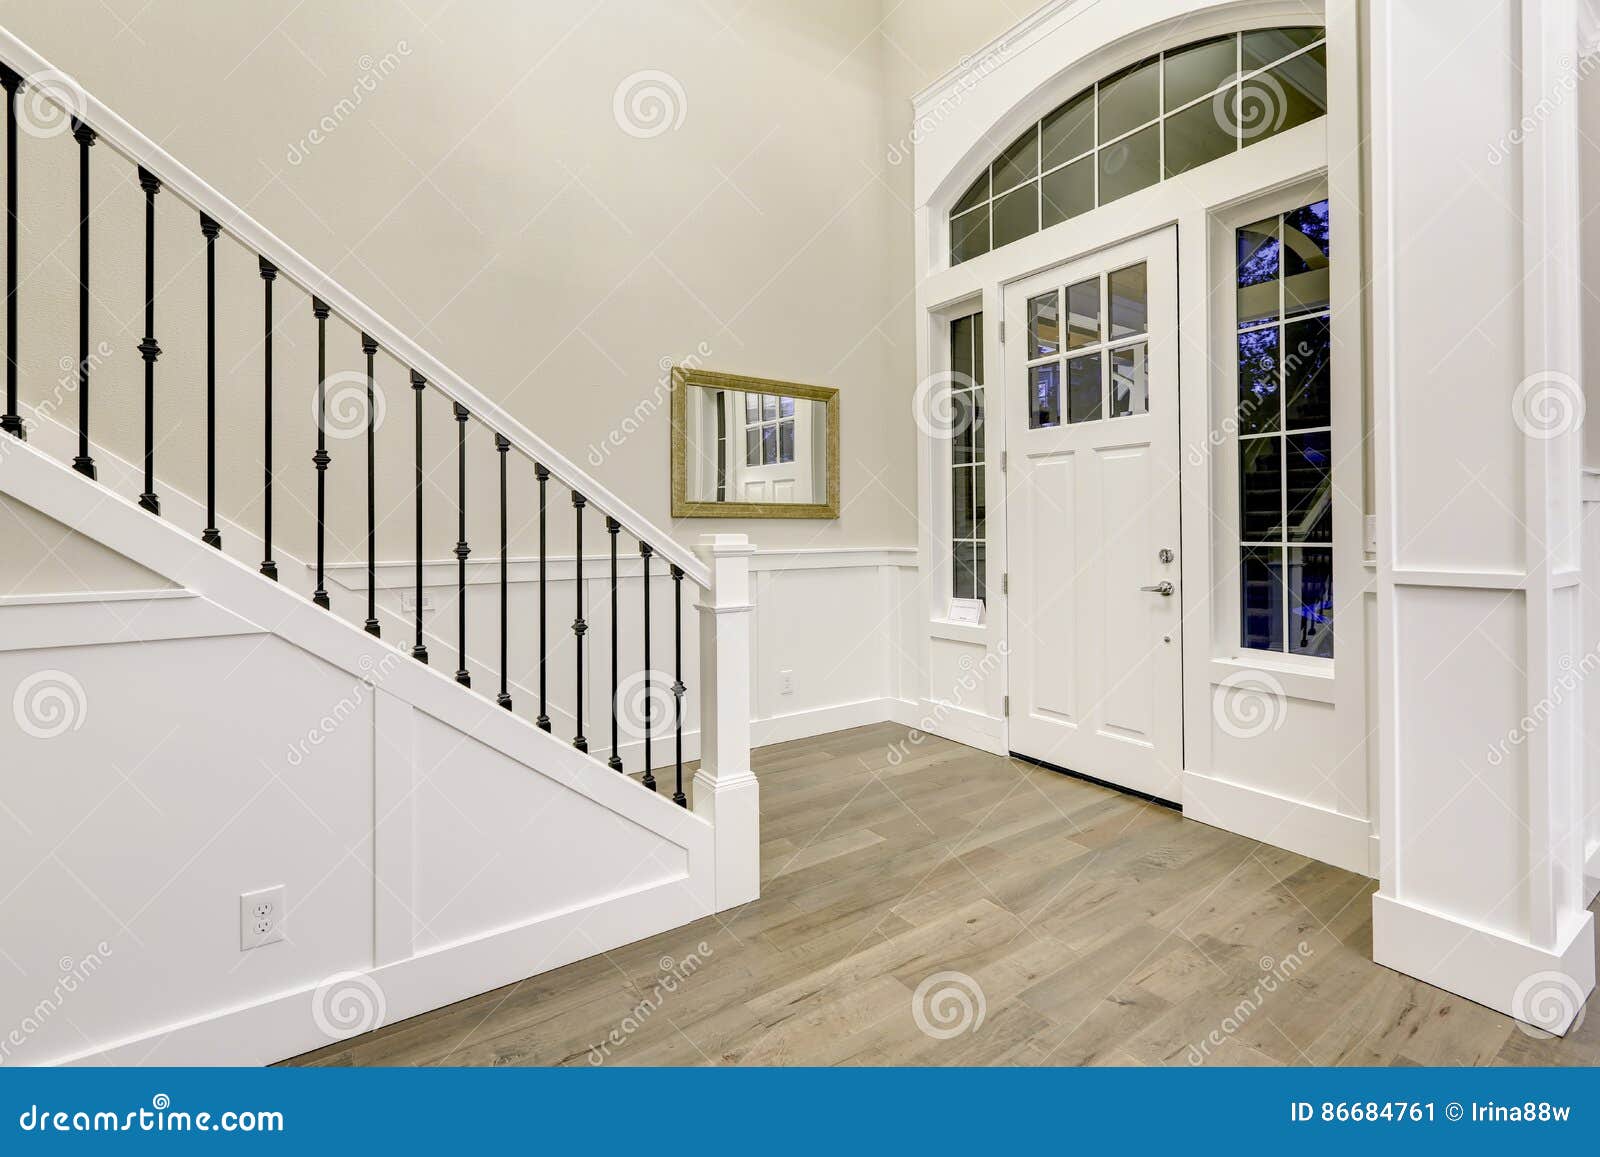 Chic White Entryway Design Accented With High Ceiling Stock Image